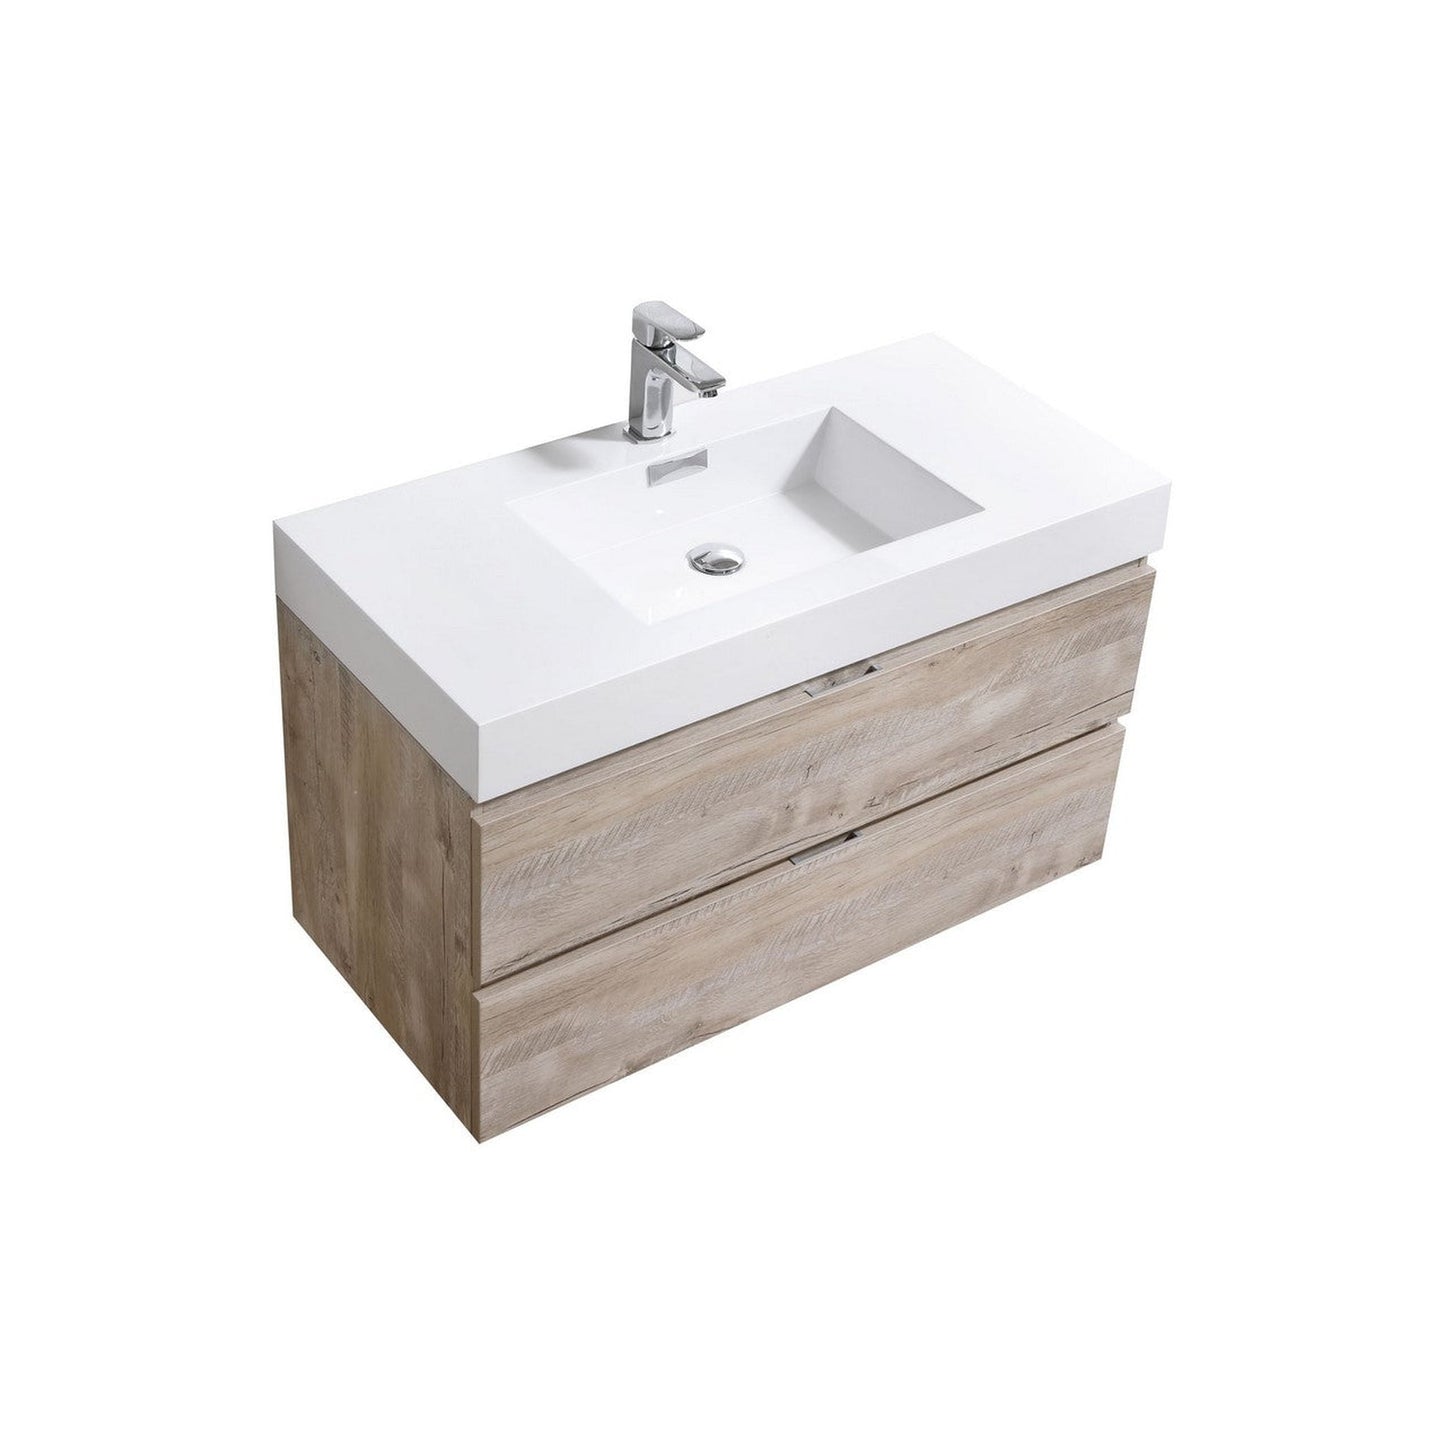 KubeBath Bliss 40" Nature Wood Wall-Mounted Modern Bathroom Vanity With Single Integrated Acrylic Sink With Overflow and 36" Wood Framed Mirror With Shelf